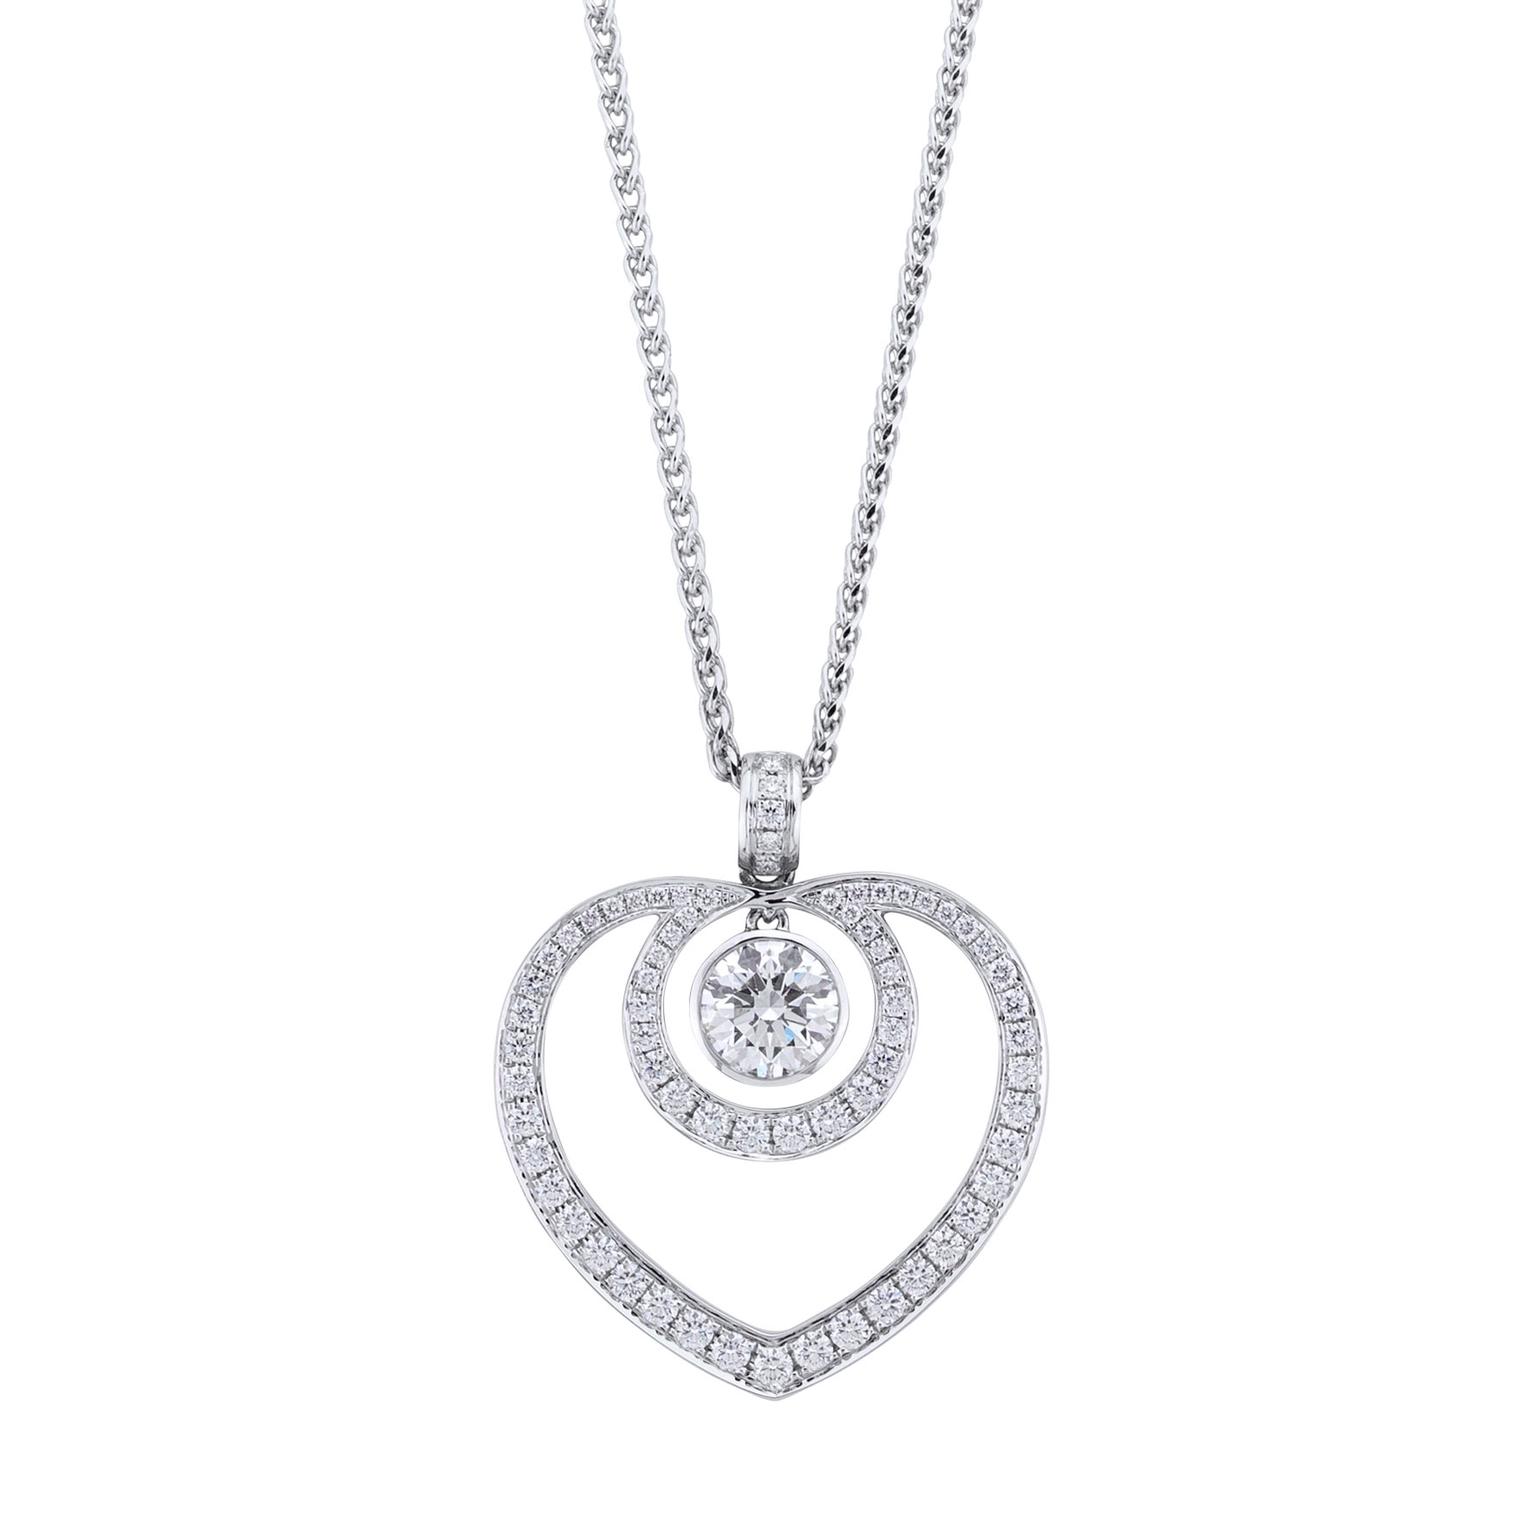 Boodles Sophie pendant necklace in platinum and diamond